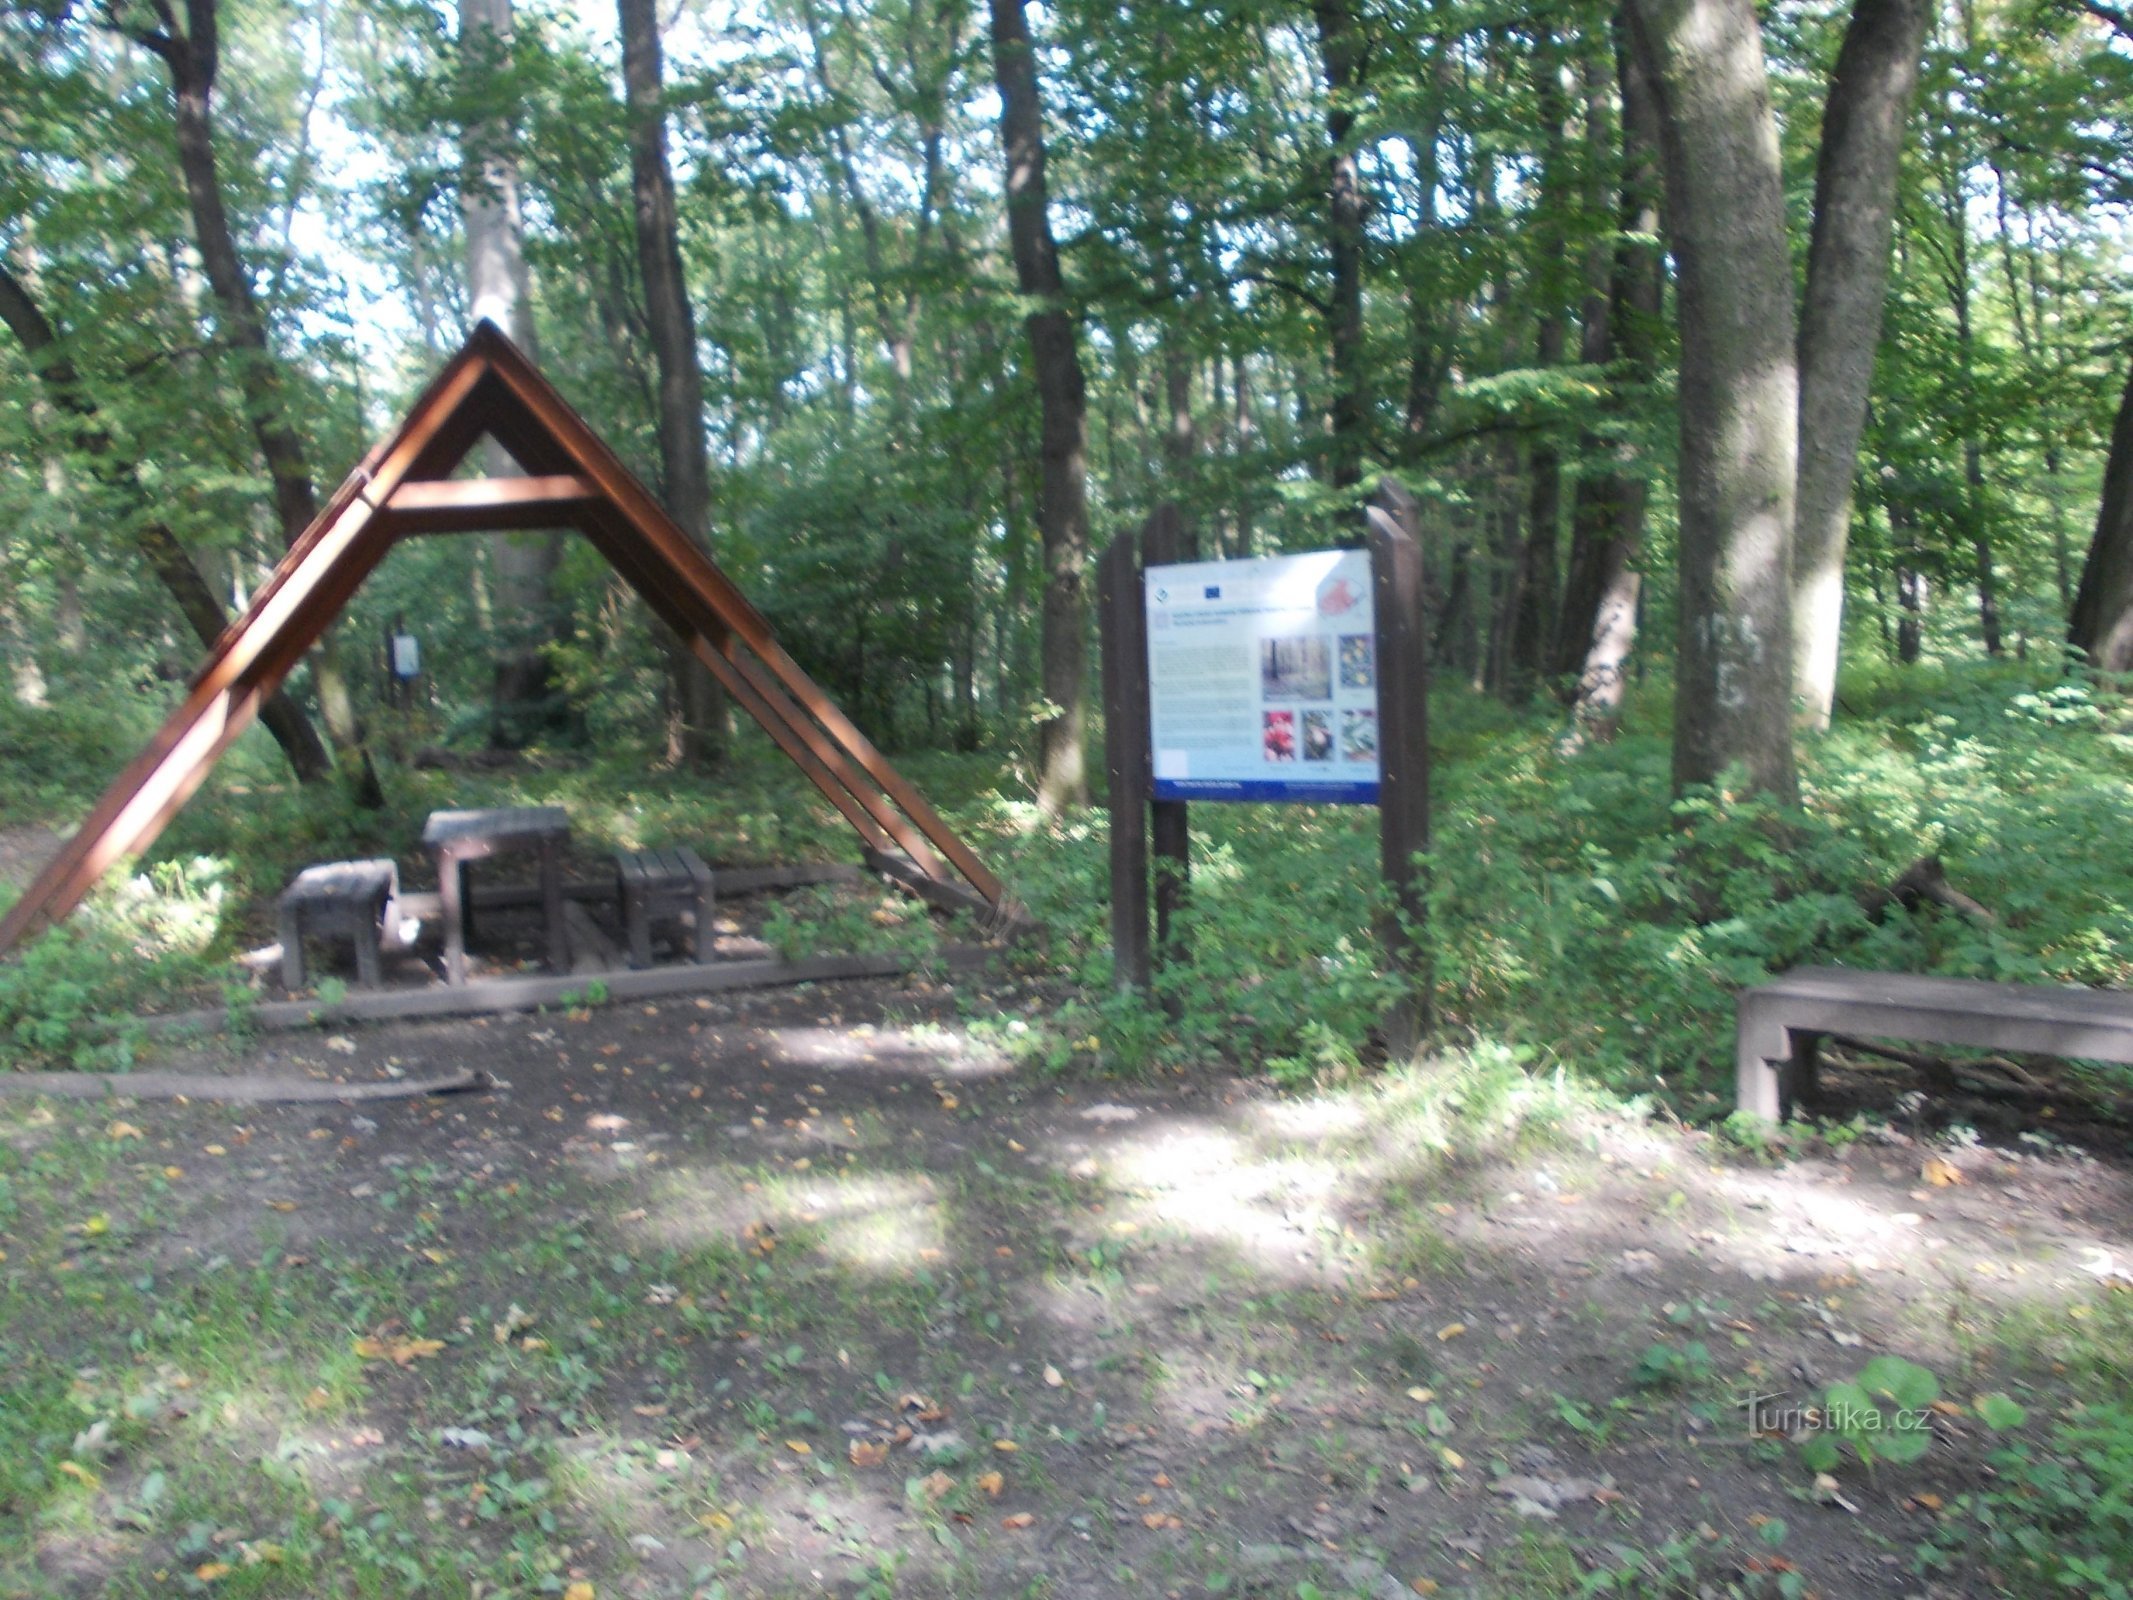 shelter and information panel